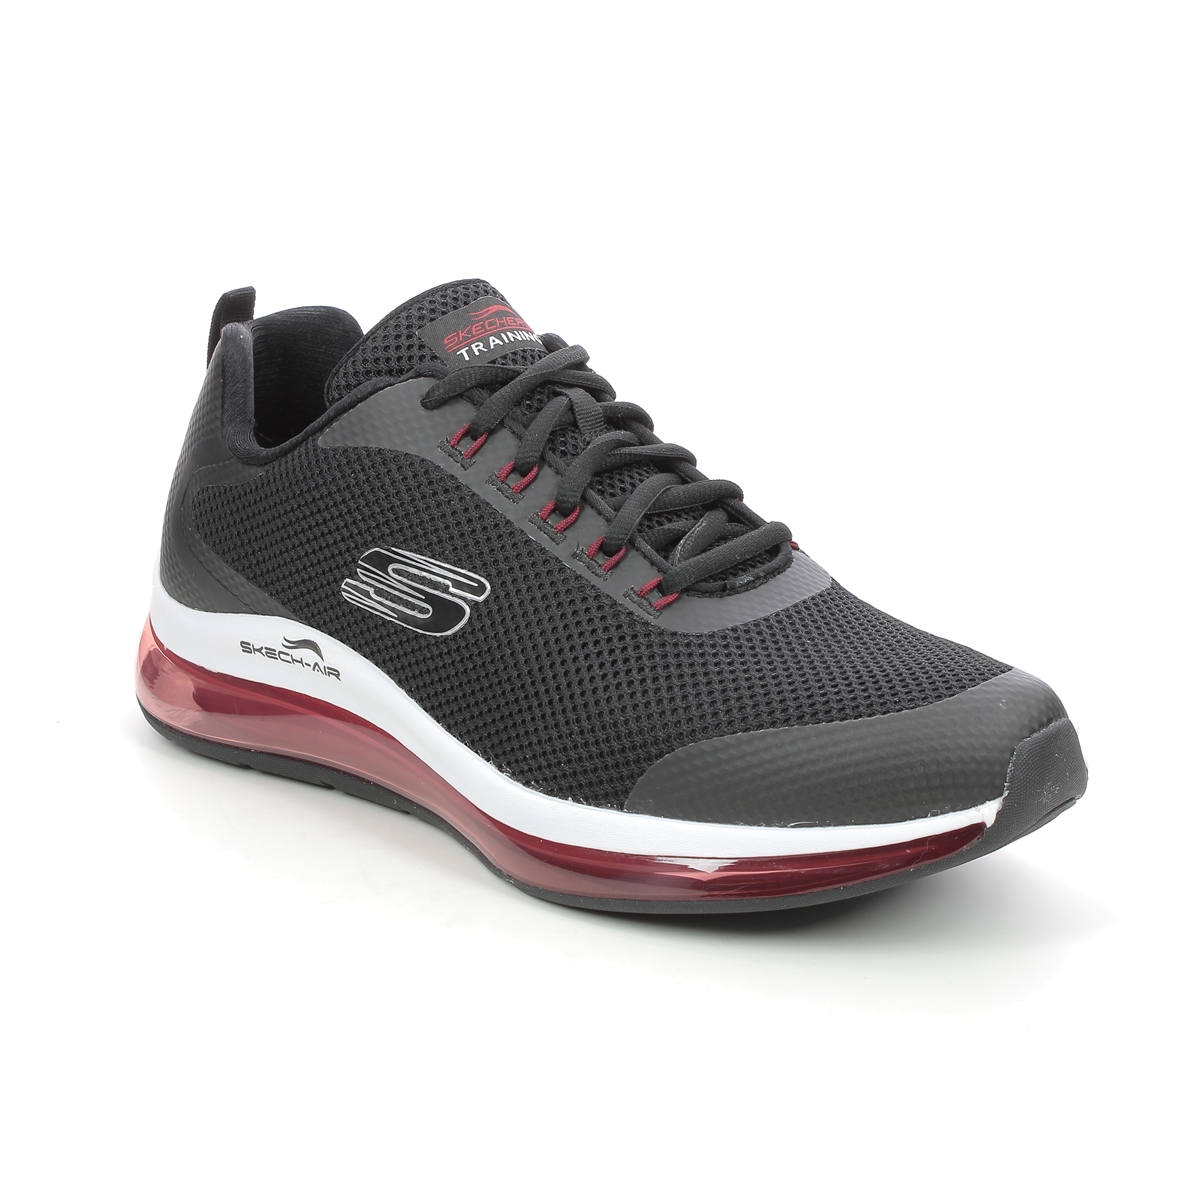 Skechers Skech Air 2 Mens Black Red Mens Trainers 232036 In Size 8.5 In Plain Black Red